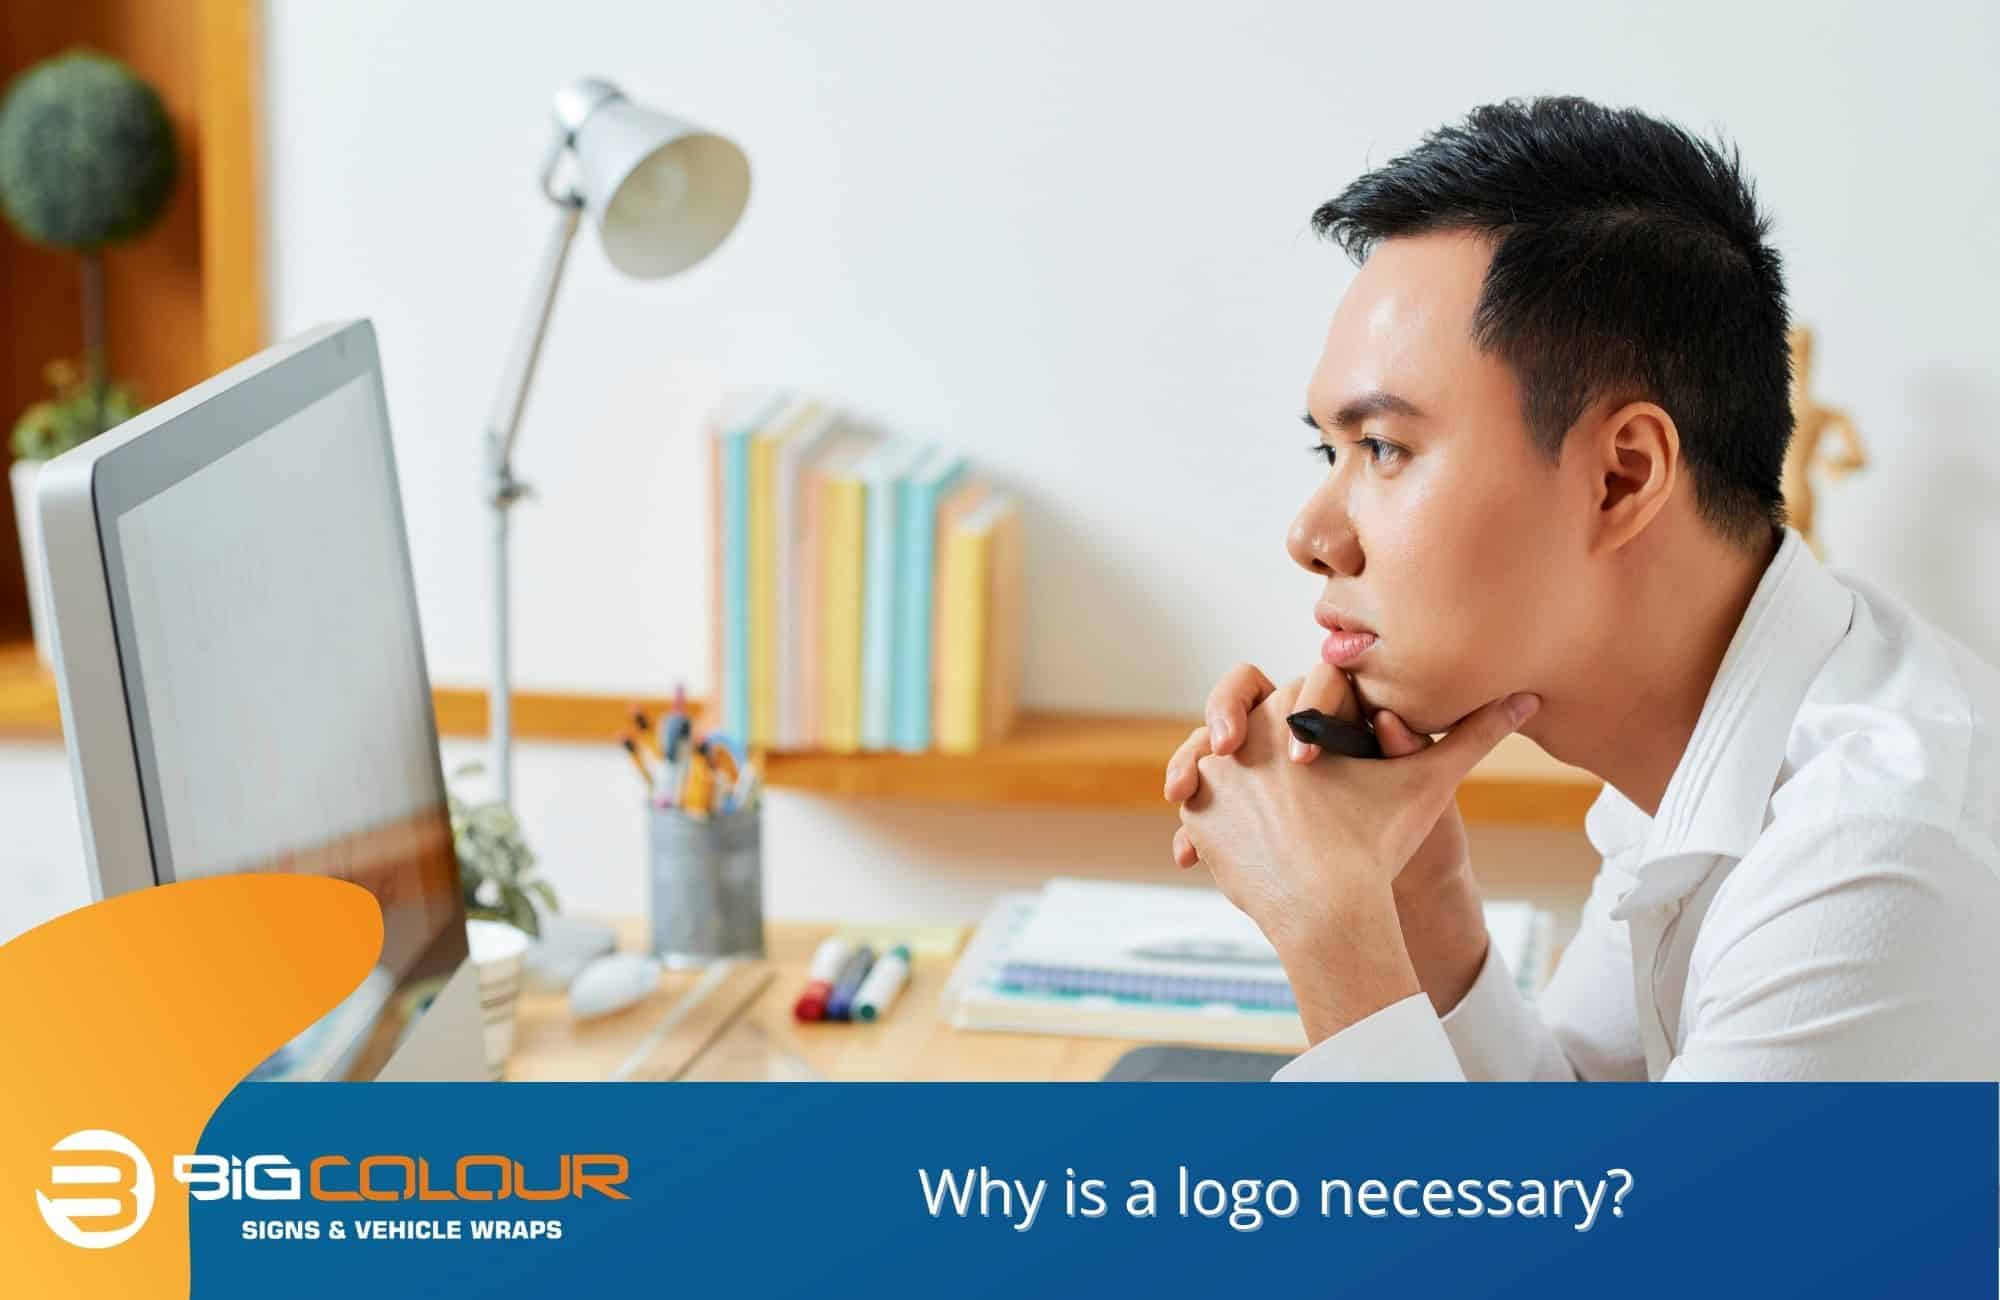 Why is a logo necessary?